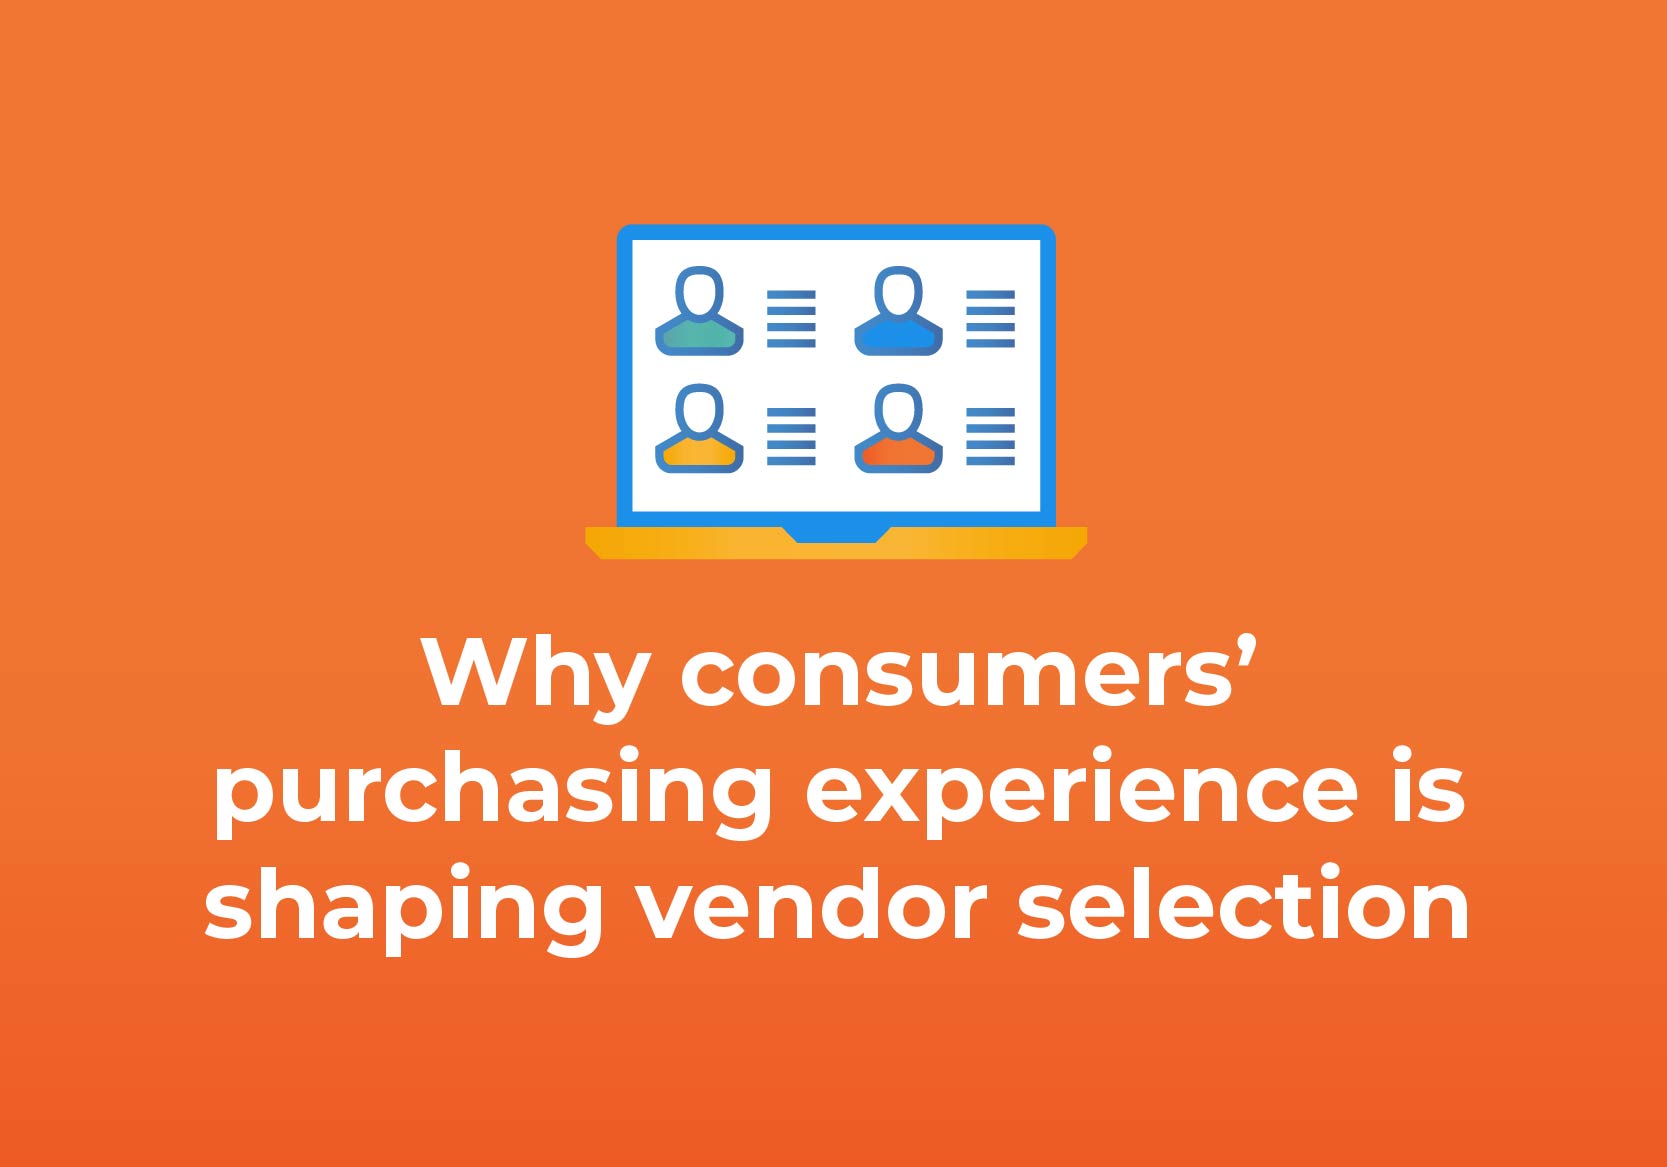 Why Consumers’ Purchasing Experience is Shaping Vendor Selection